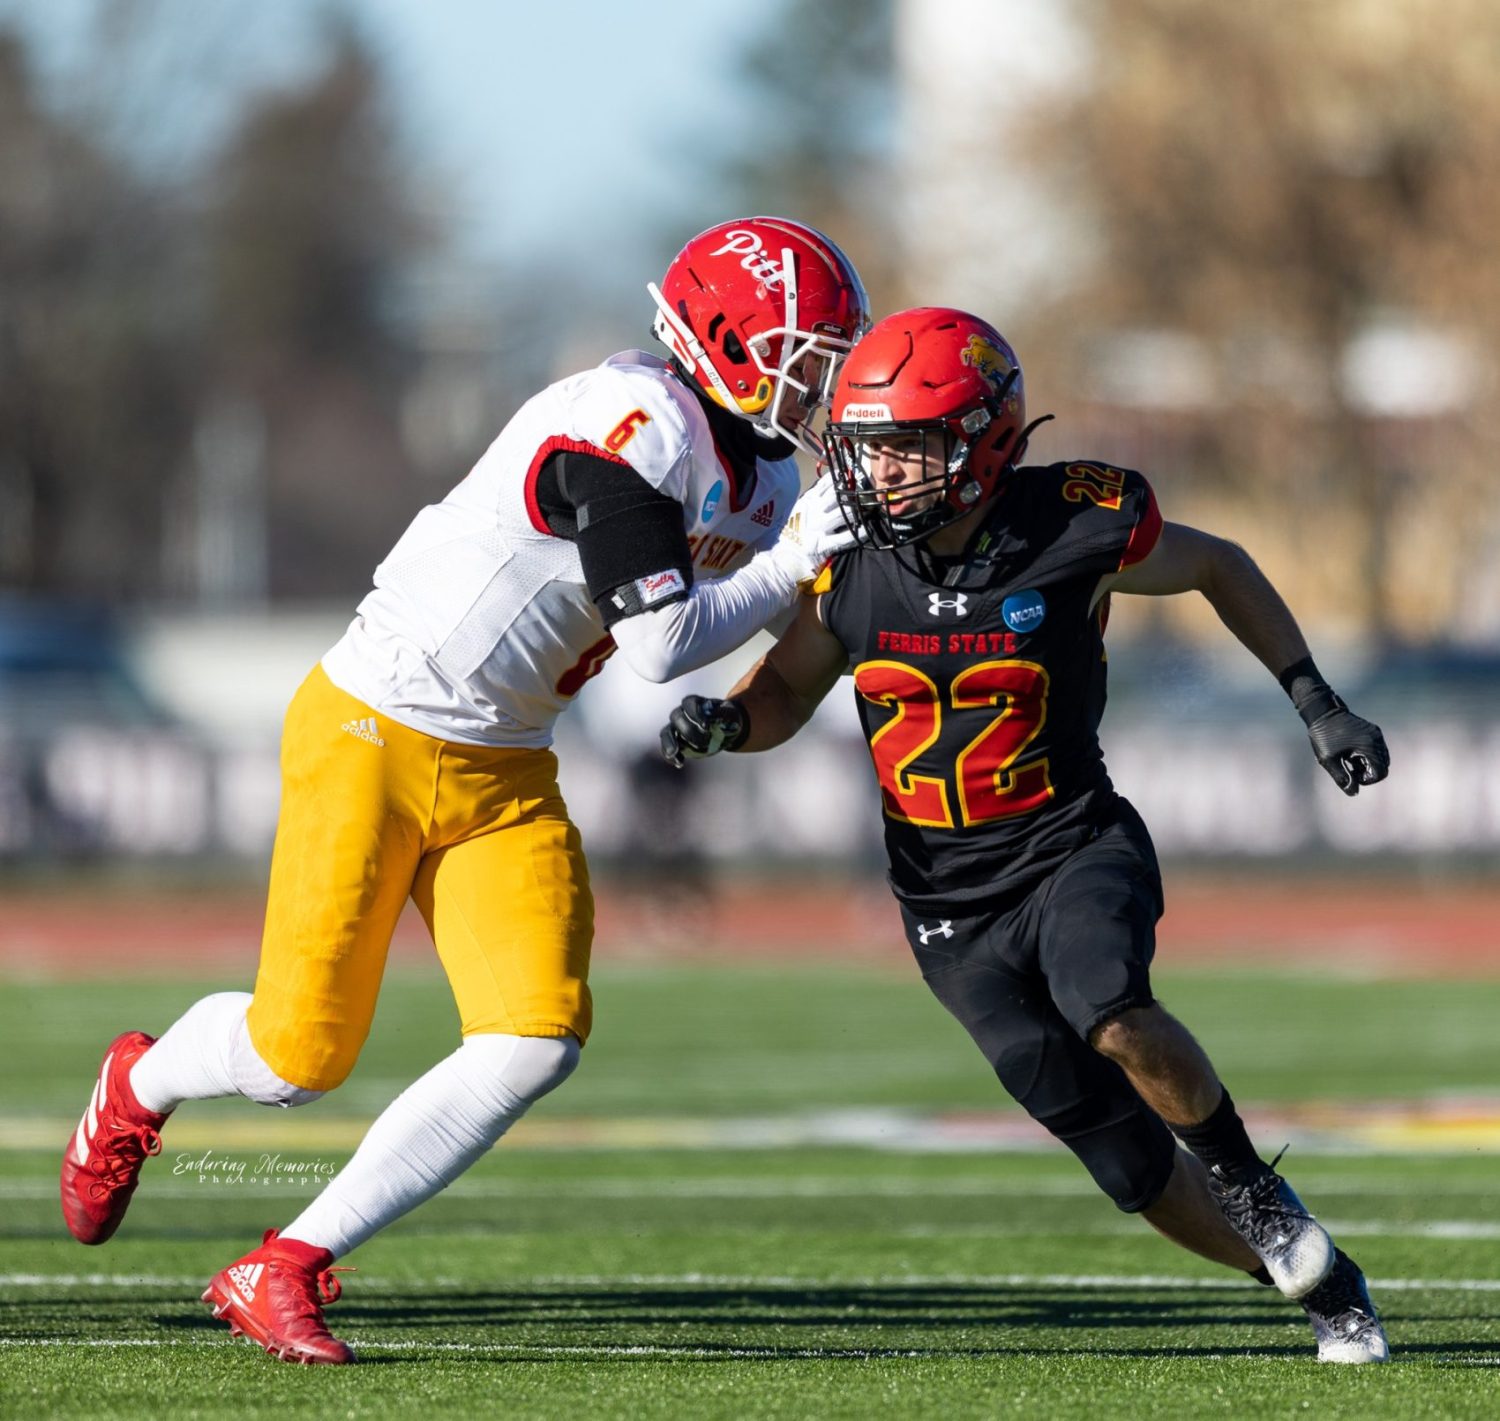 Brady Rose scores a key touchdown in Ferris State victory over Pittsburgh State